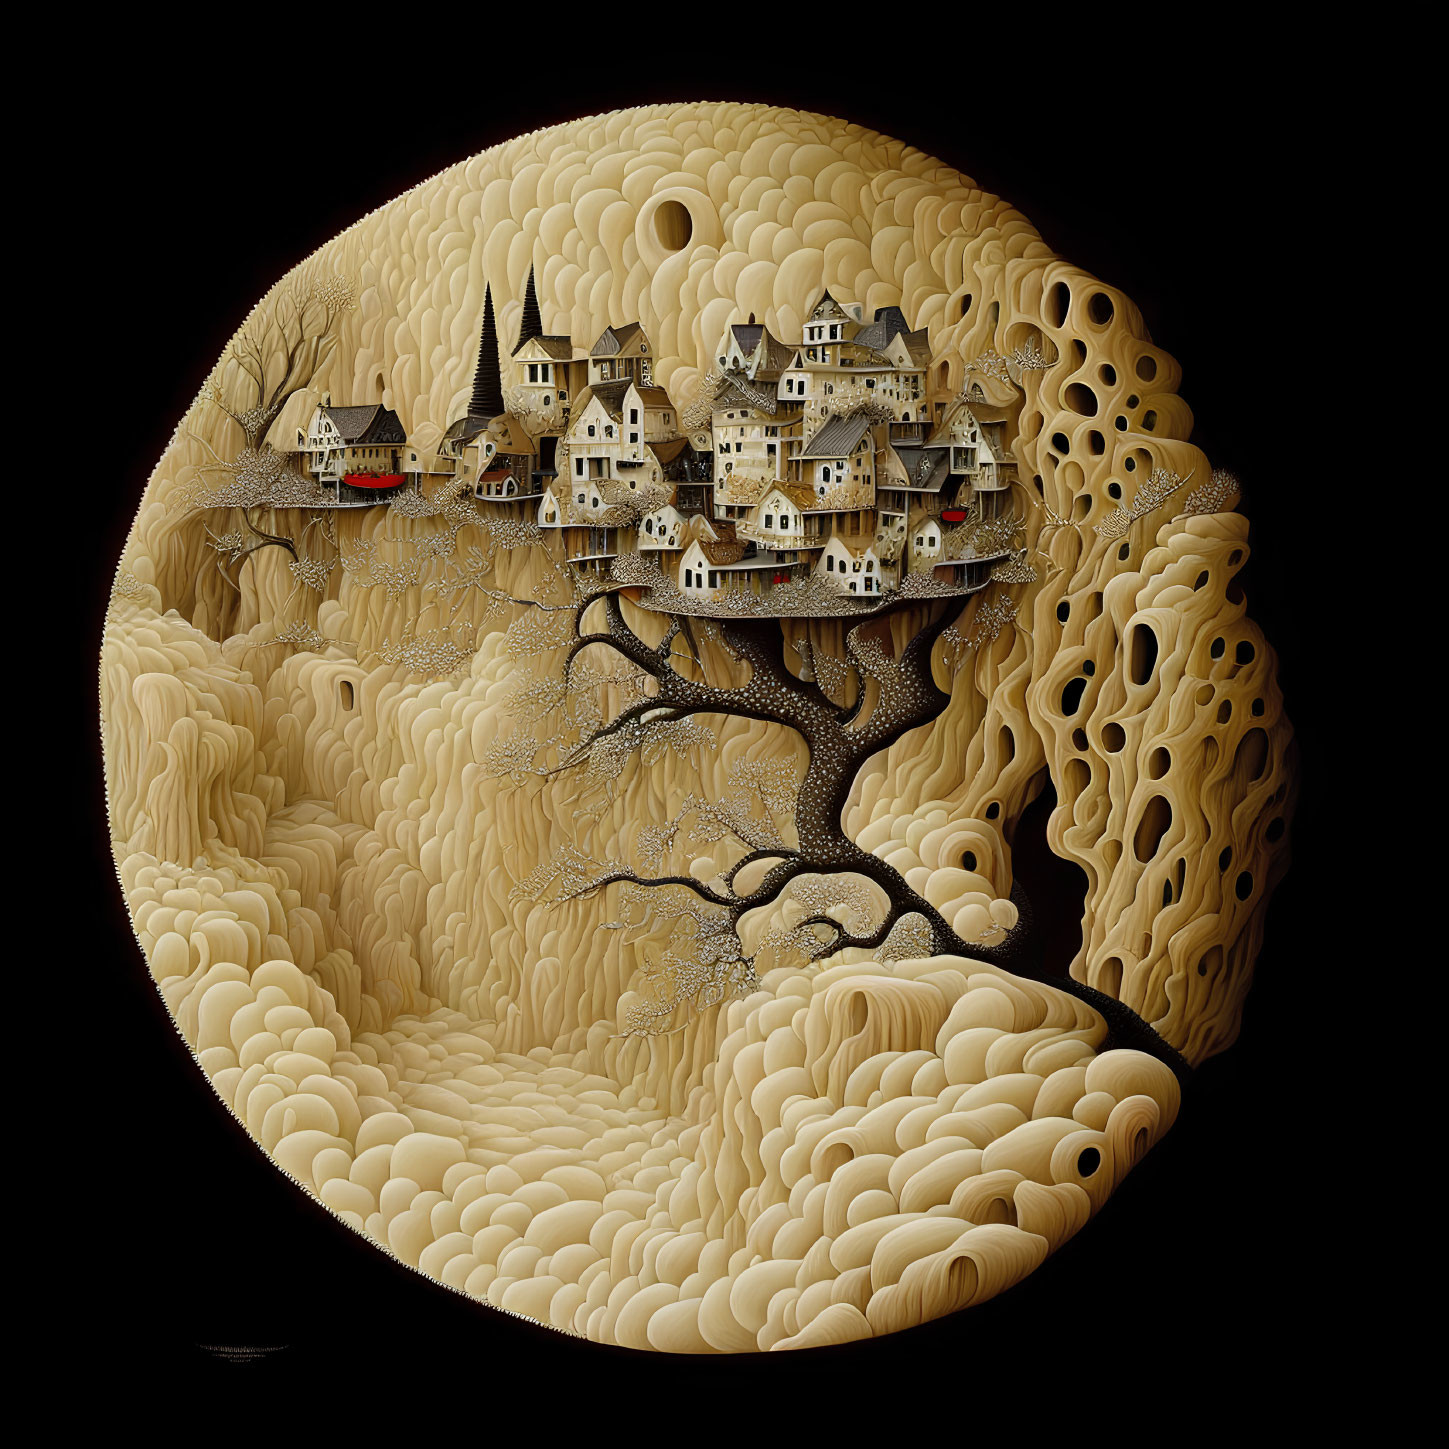 Whimsical spherical artwork with intricate tree village on black background